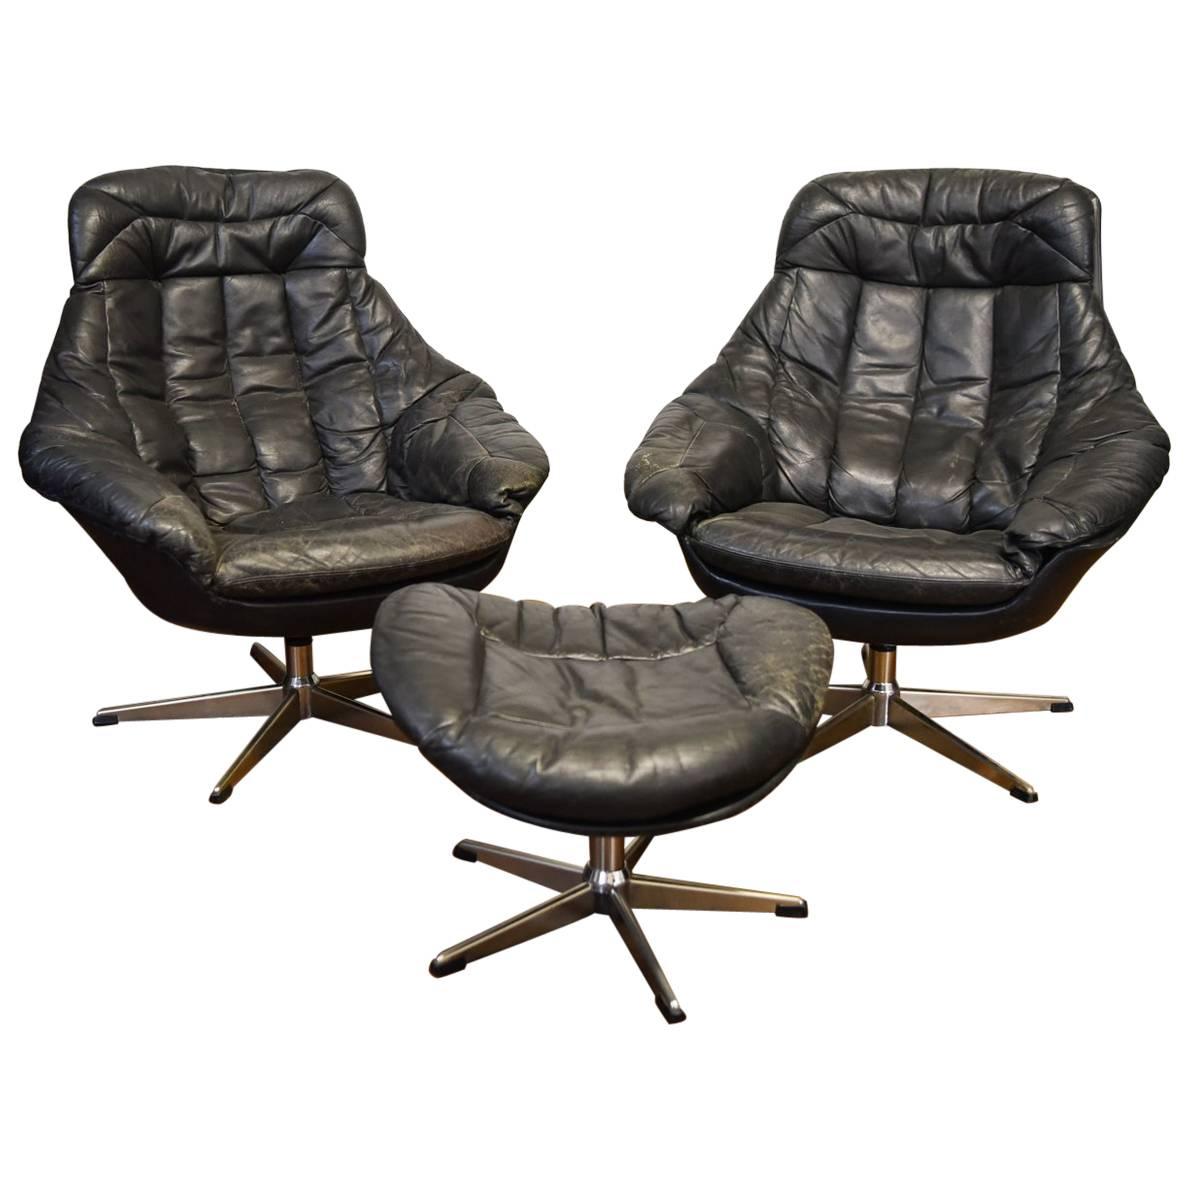 Pair of Black Leather Lounge Chairs with Ottoman by H.W. Klein for Bramin Mobler